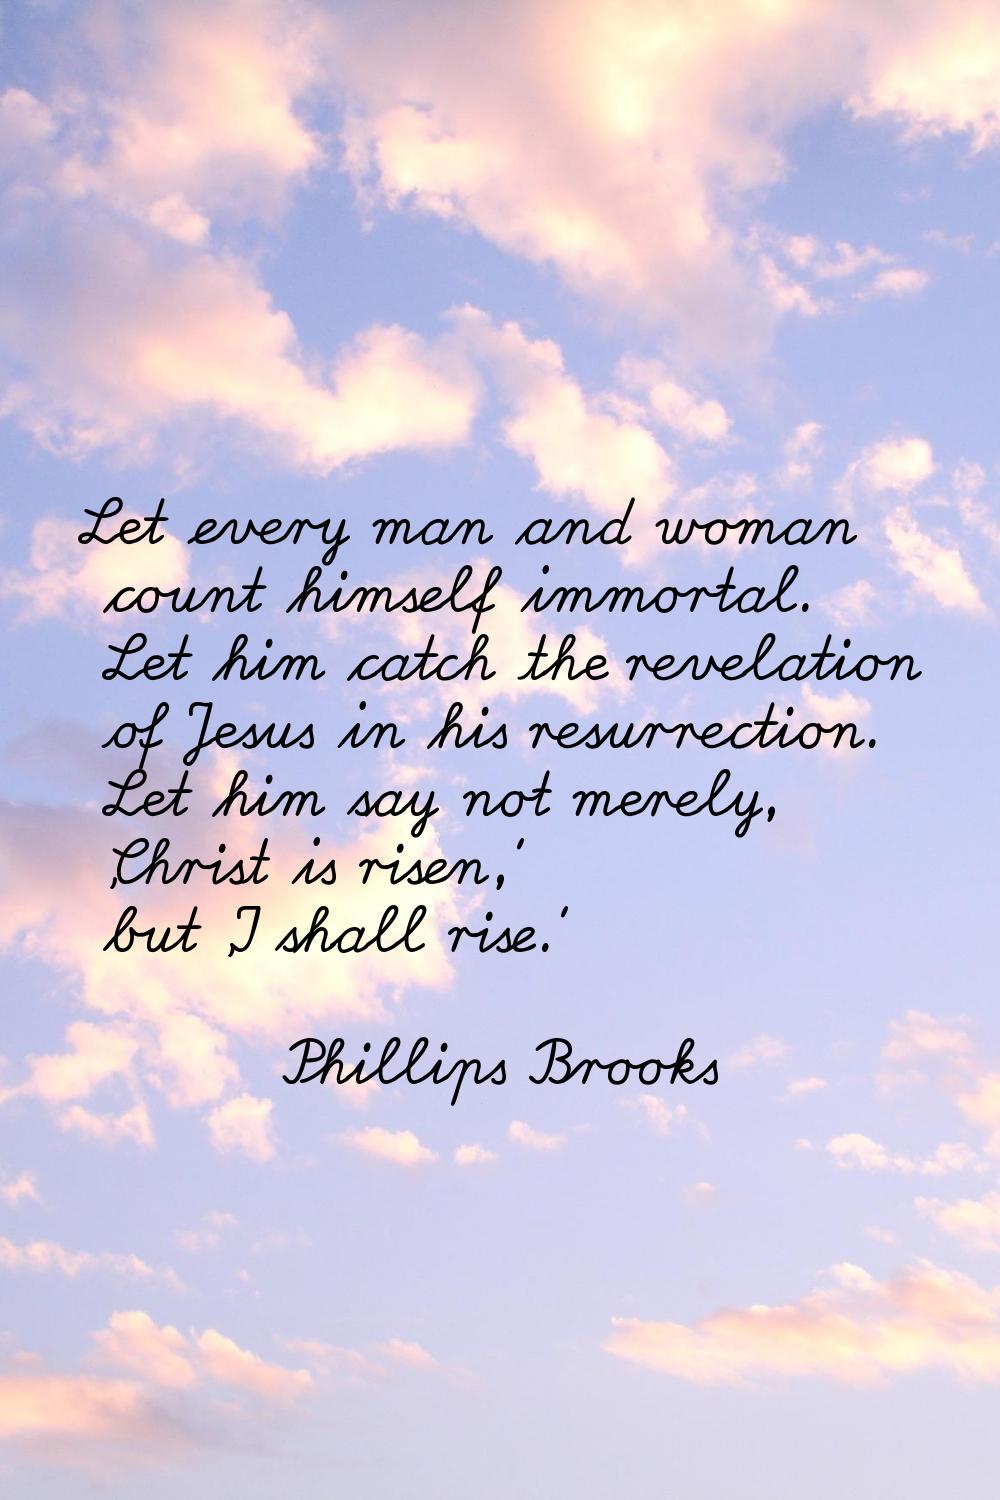 Let every man and woman count himself immortal. Let him catch the revelation of Jesus in his resurr